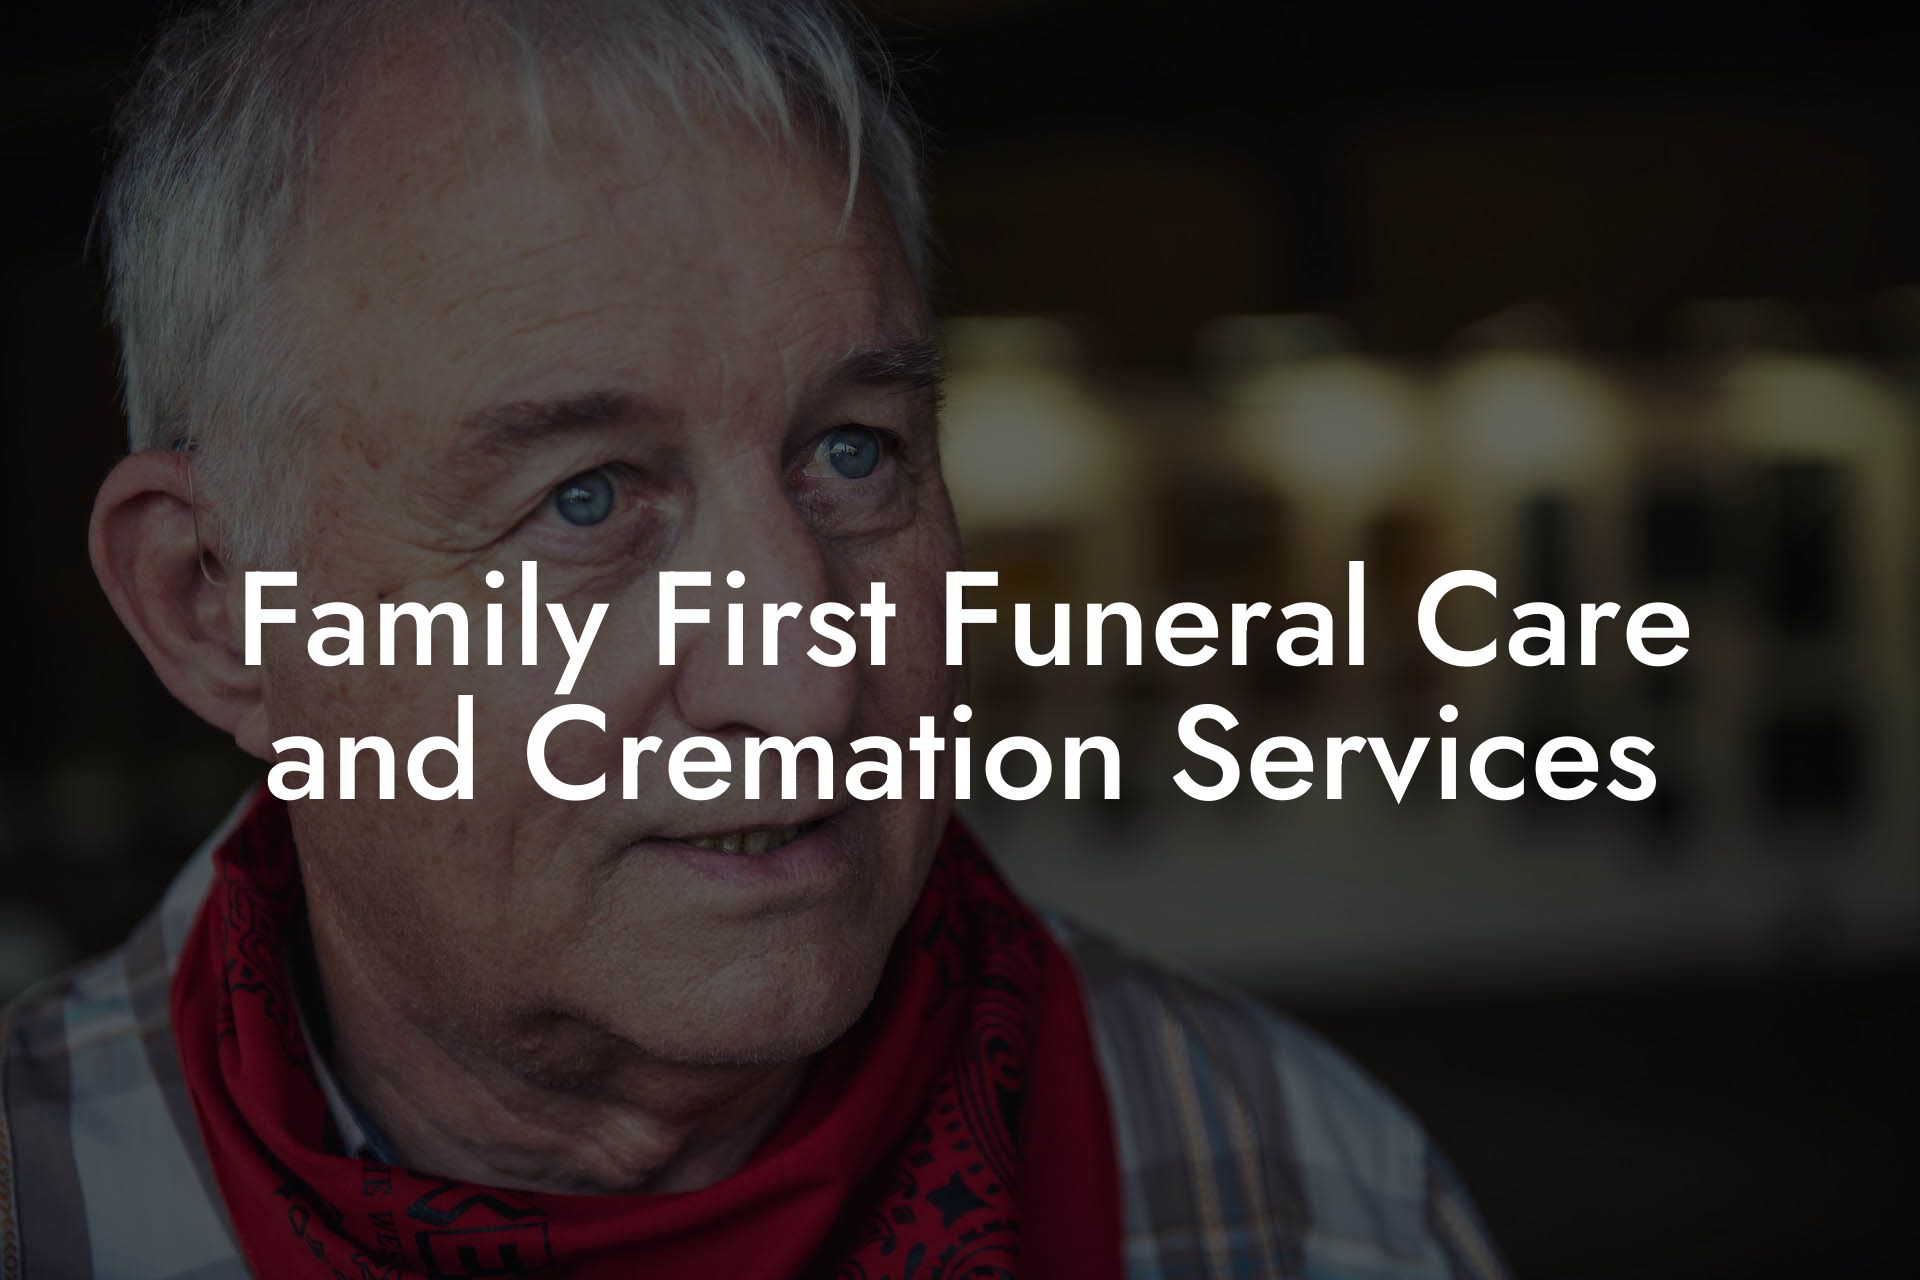 Family First Funeral Care and Cremation Services